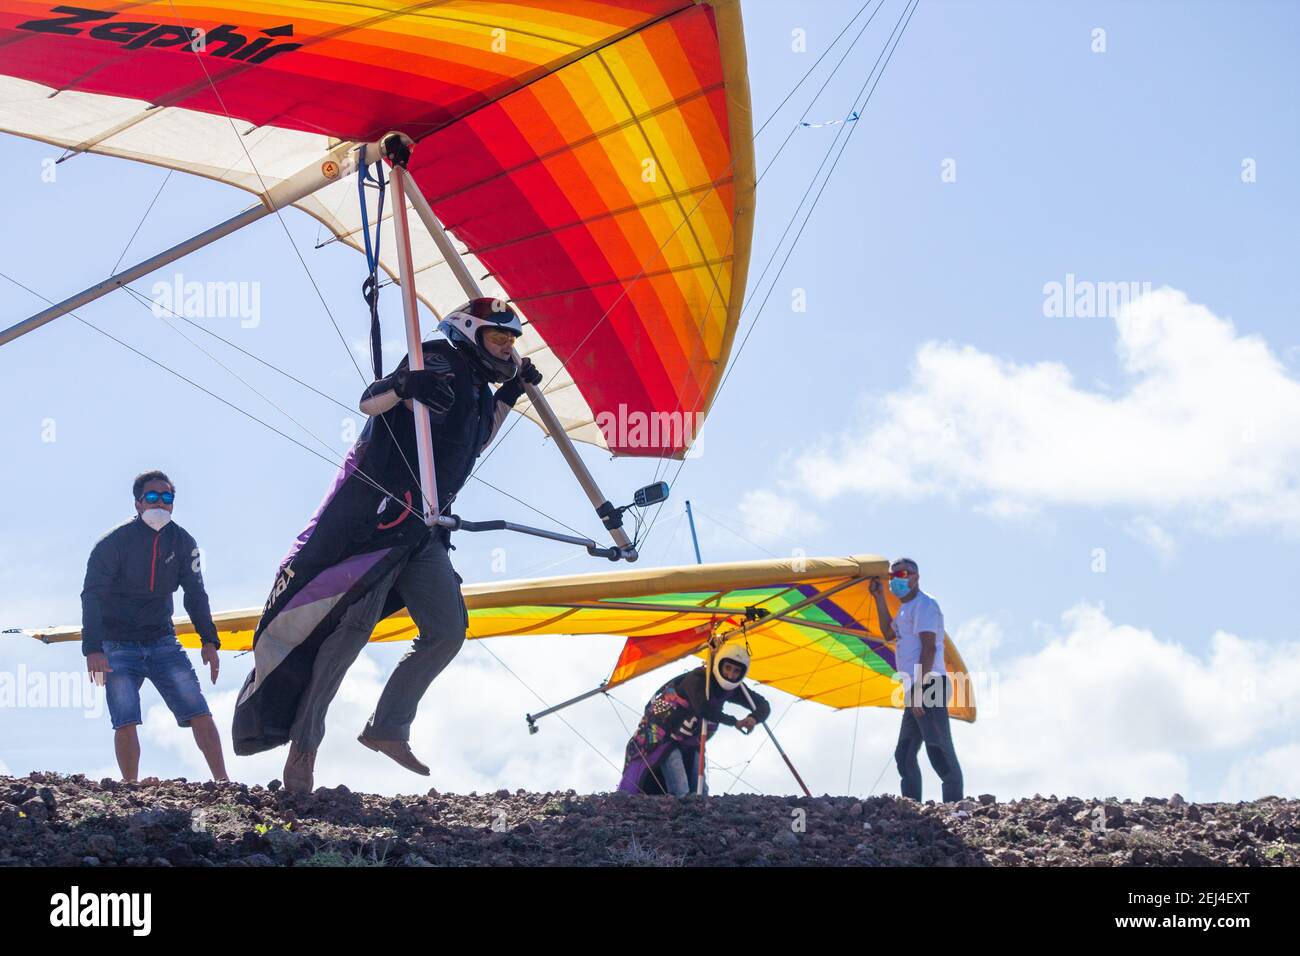 Las Palmas, Gran Canaria, Canary Islands, Spain. 21st February, 2021. Hang gliders taking off from cliffs over the Atlantic ocean on the rugged north coast of Gran Canaria. Credit: Alan Dawson/Alamy Live  News. Stock Photo